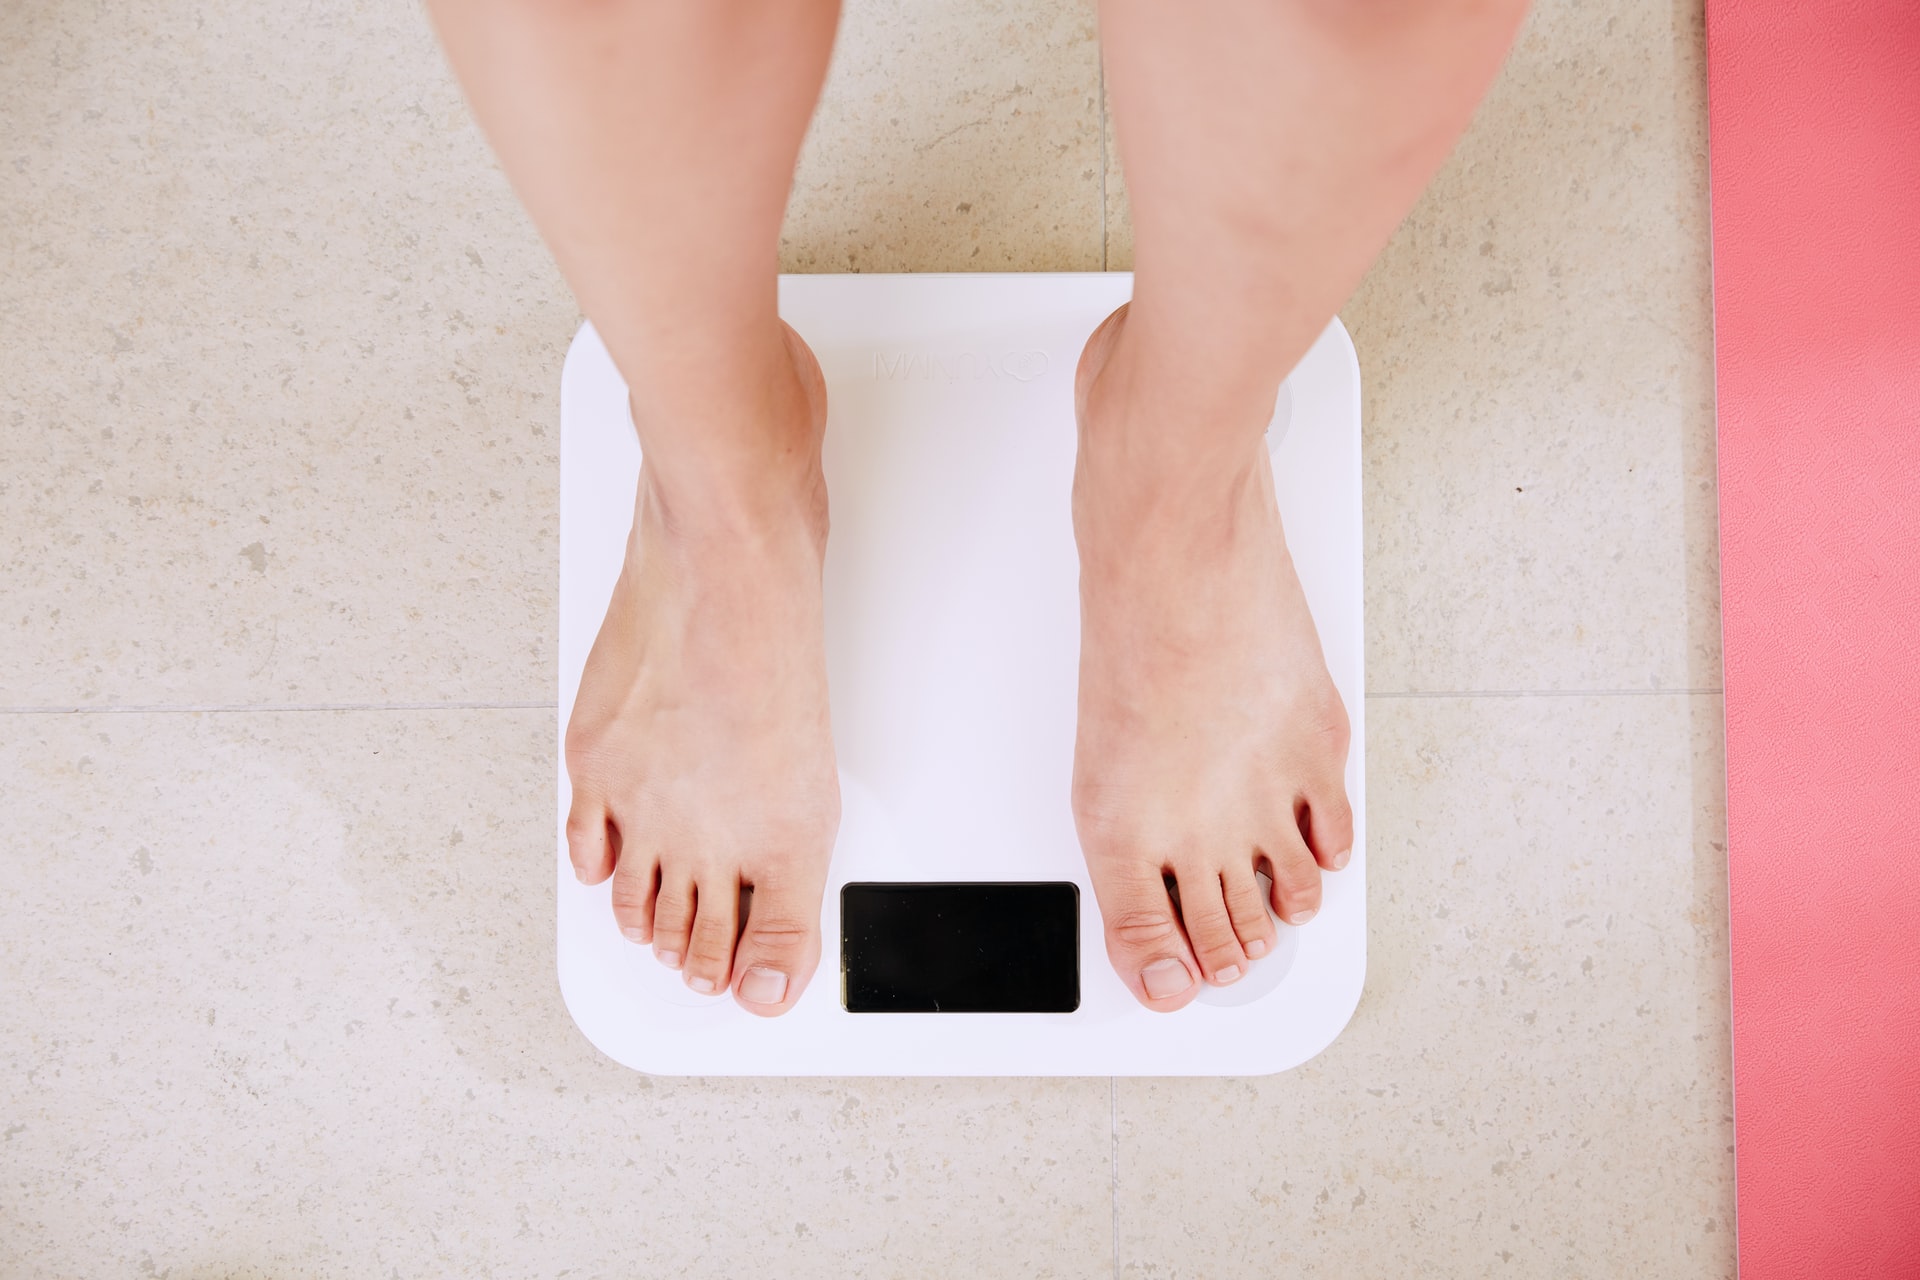 What Weighs 500 Grams To Calibrate Your Digital Scale?